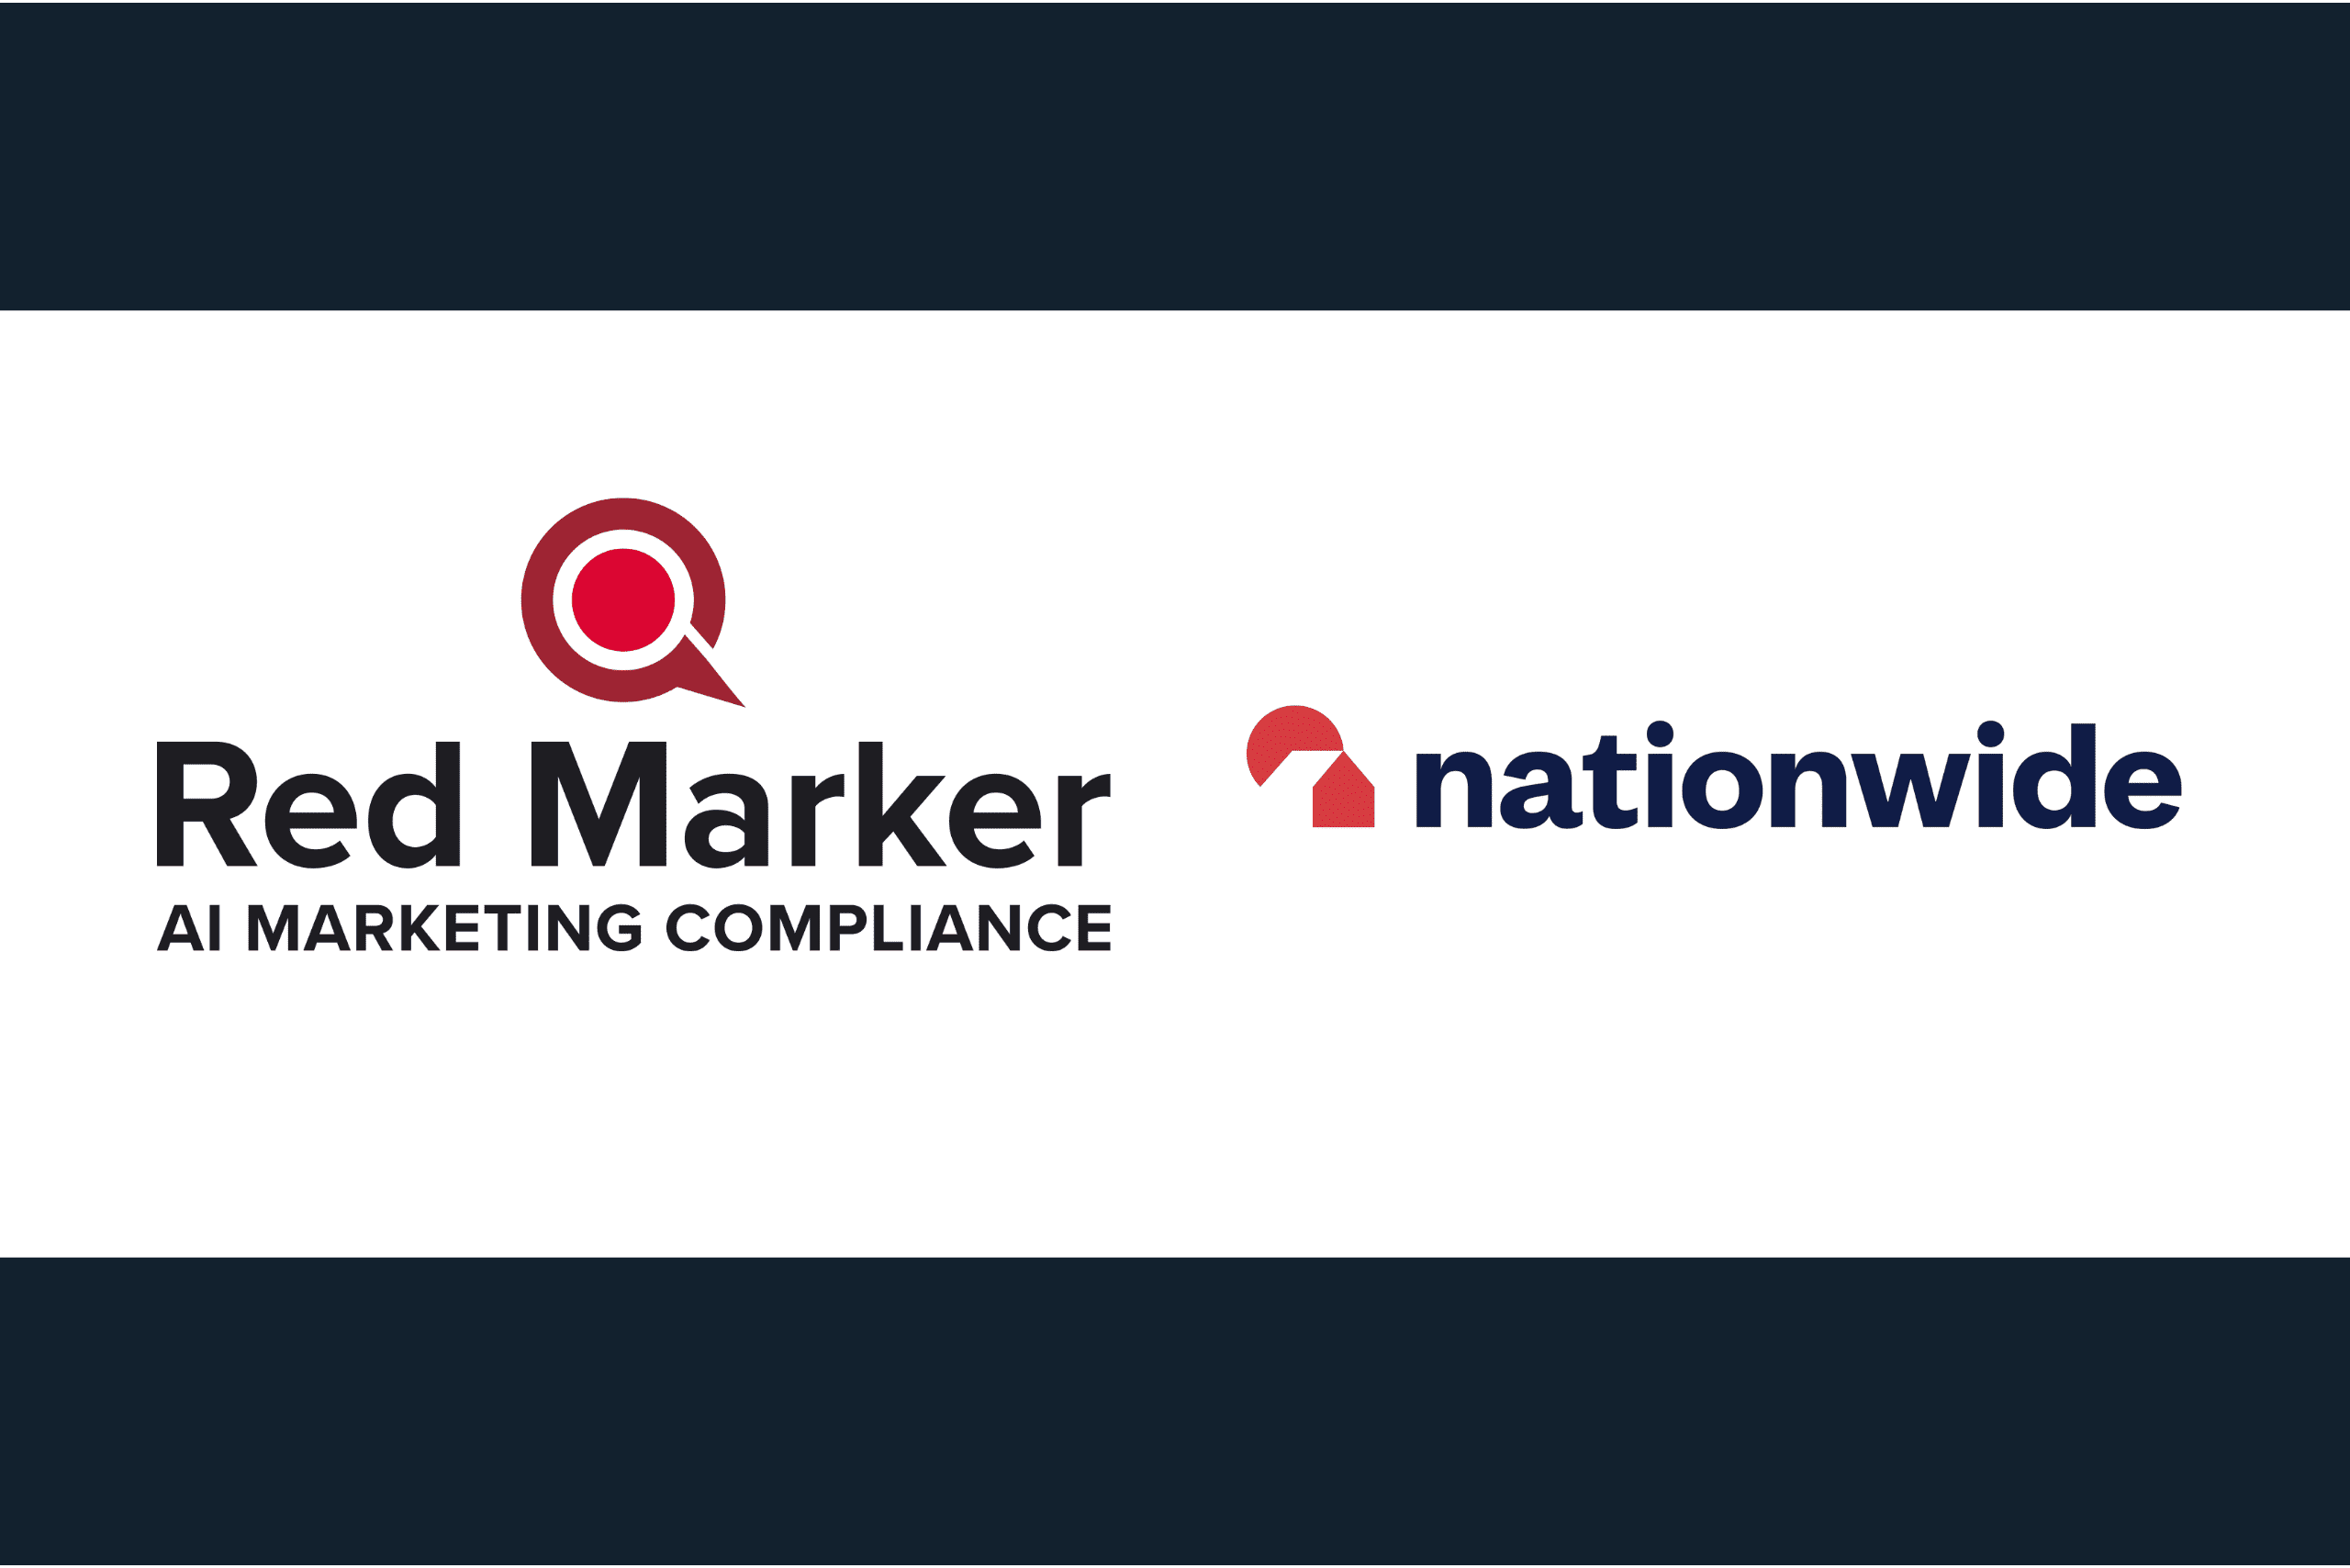 Nationwide forms strategic partnership with Red Marker